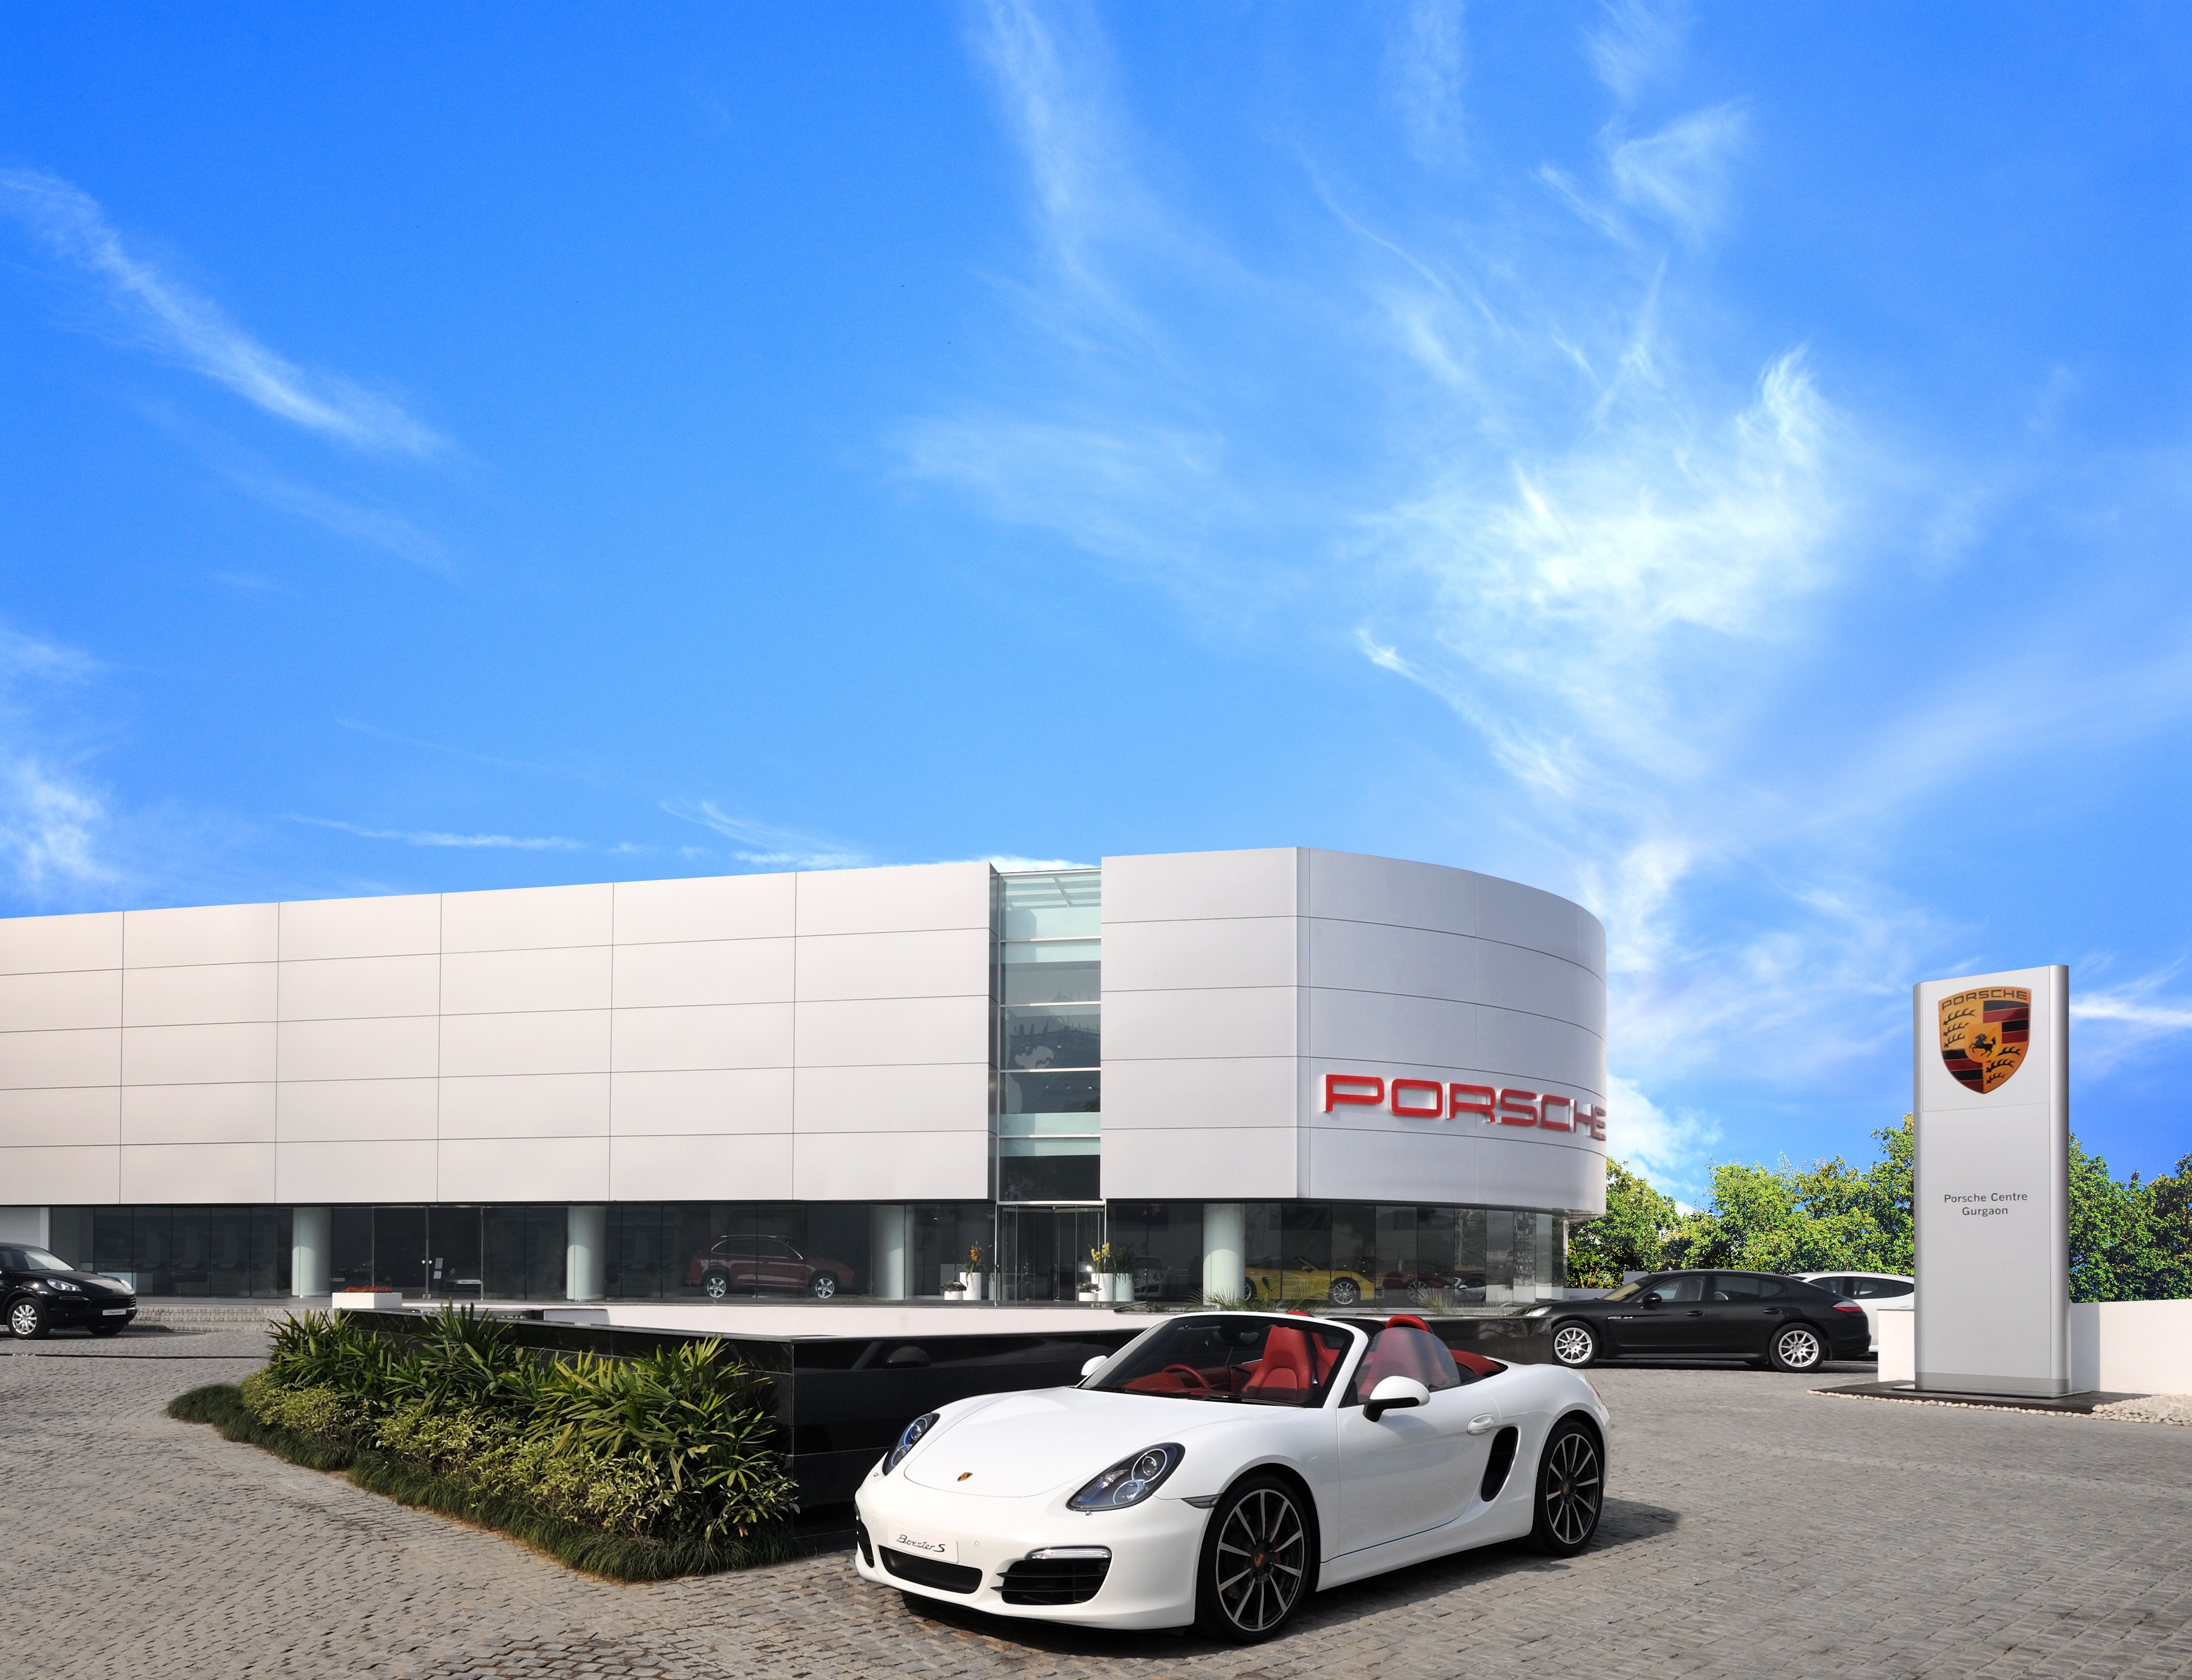 The New Porsche Center in Gurgaon is Now Open